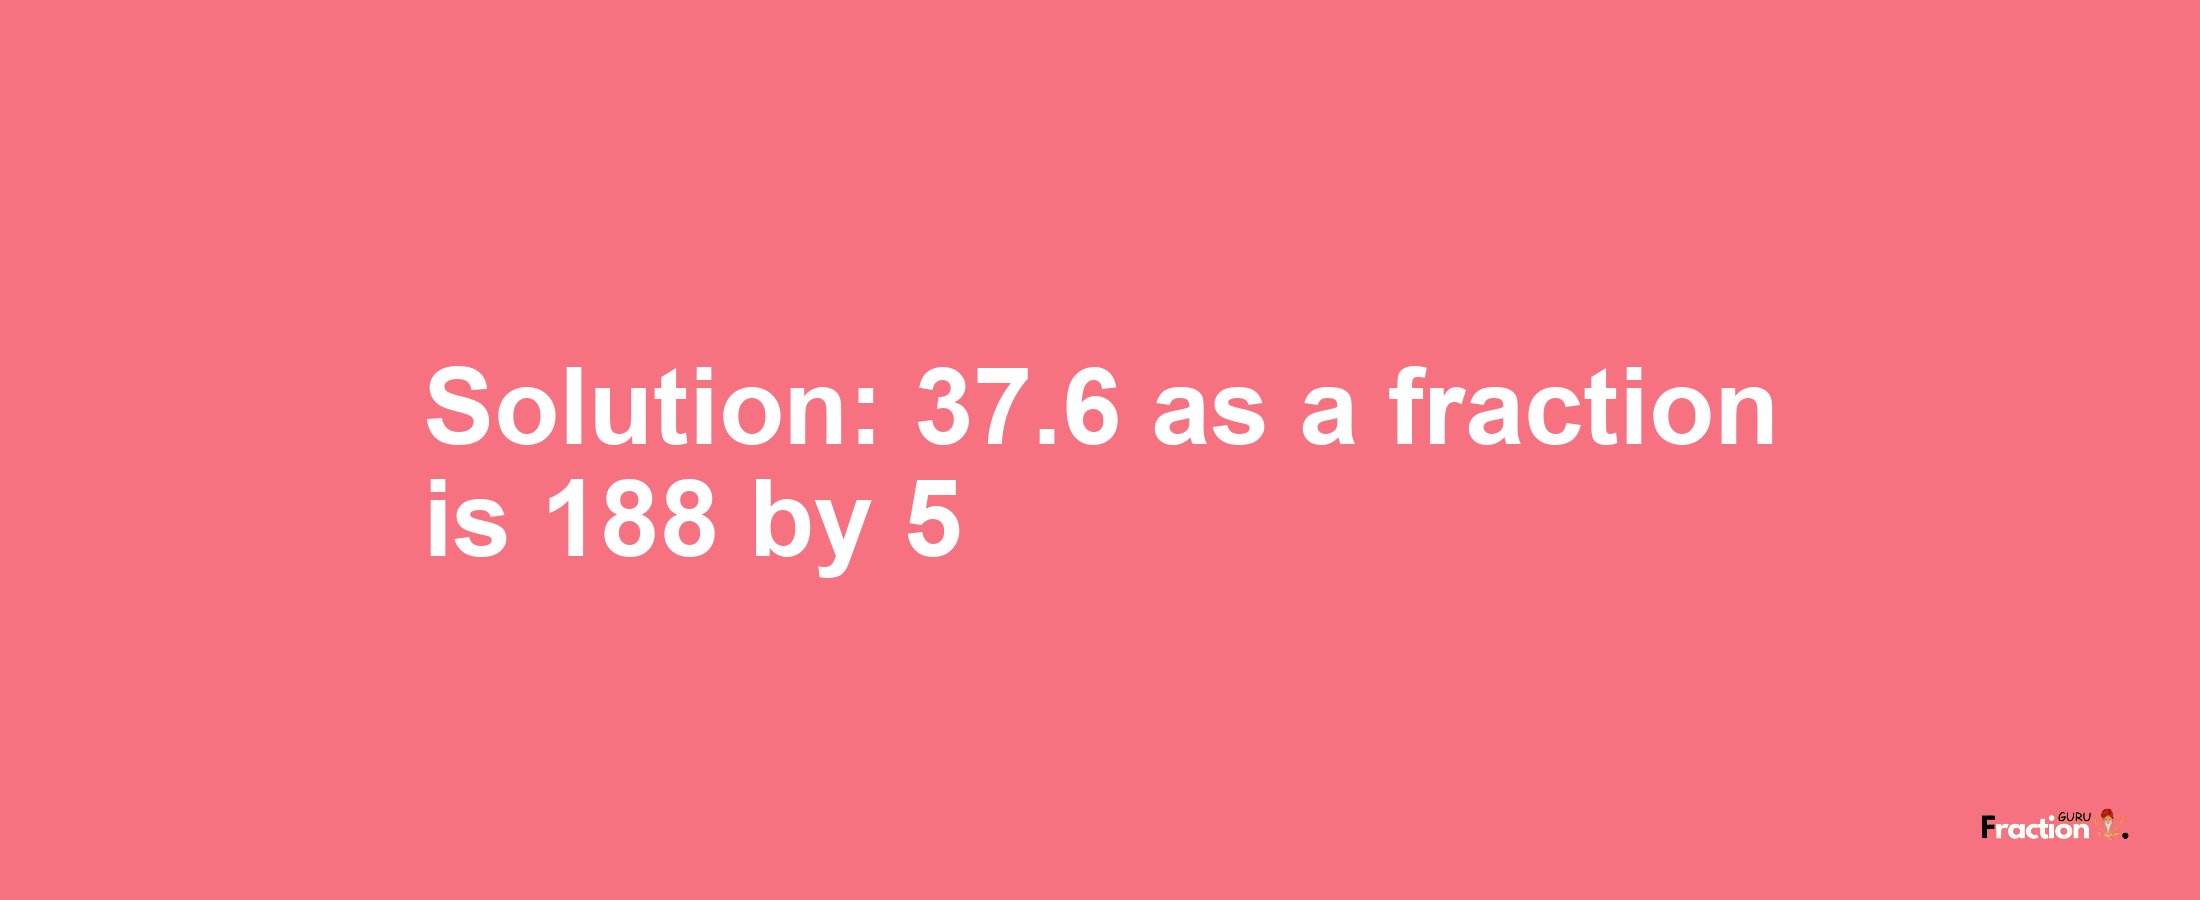 Solution:37.6 as a fraction is 188/5